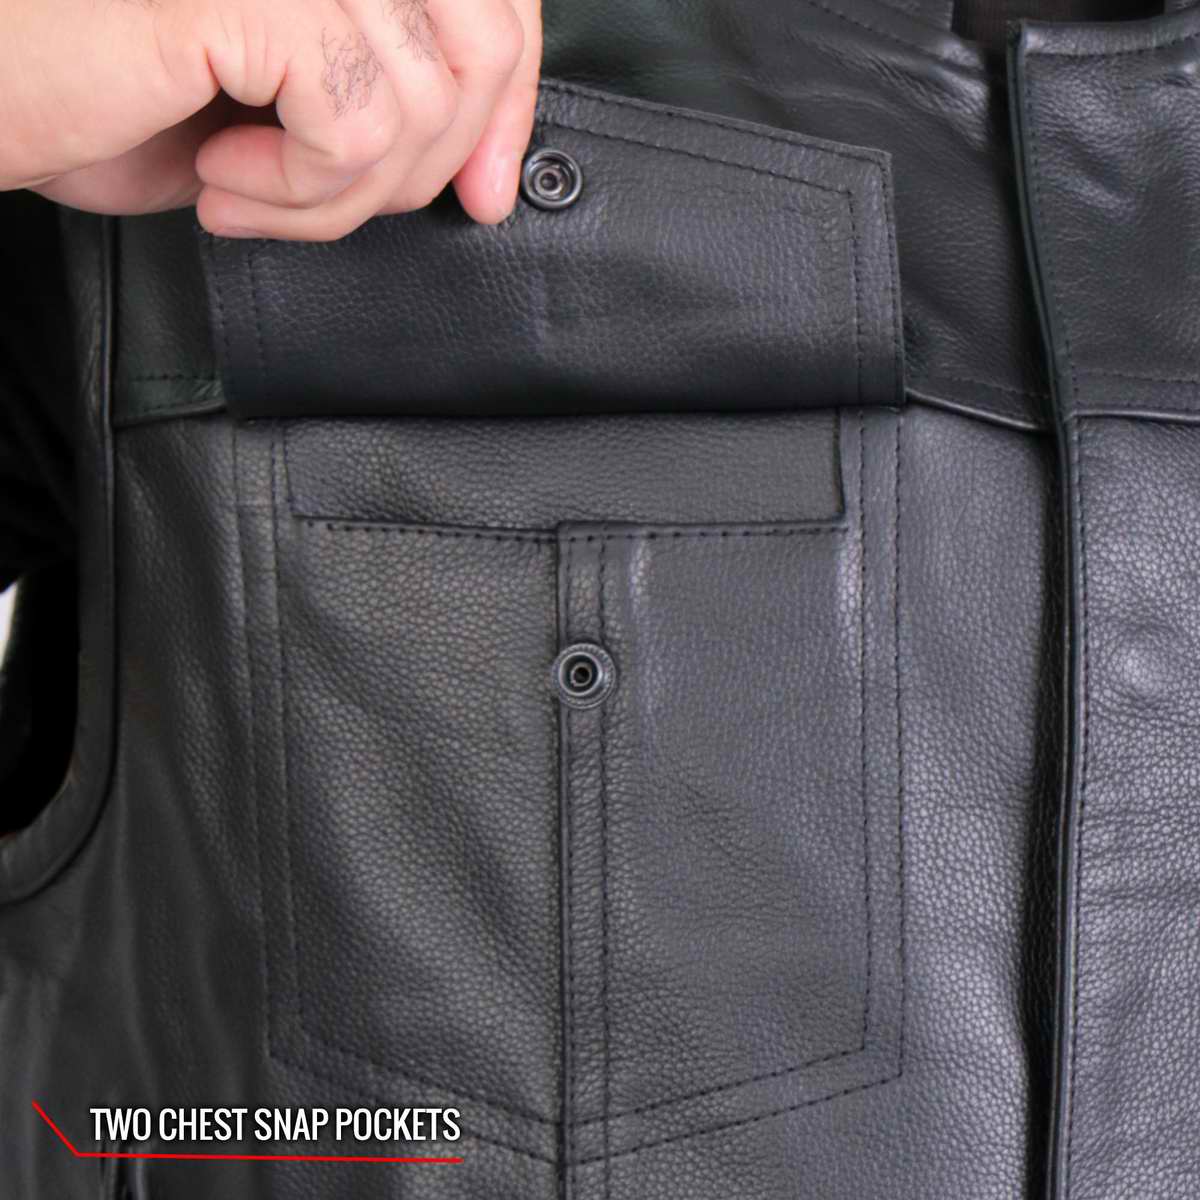 Hot Leathers VSM1053 Men's Black 'Don't Tread On Me' Conceal and Carry Leather Vest